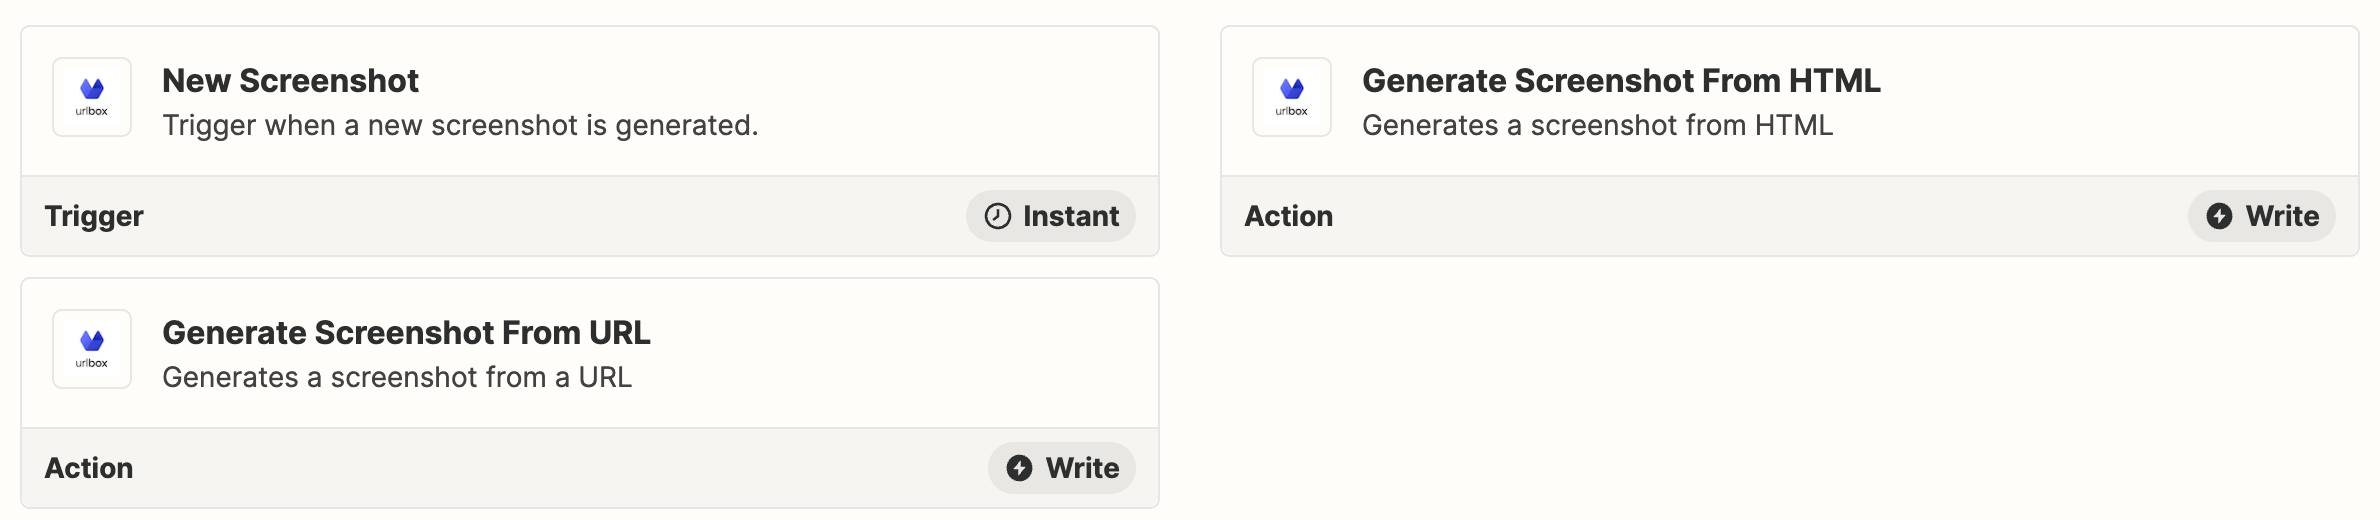 zapier triggers and actions